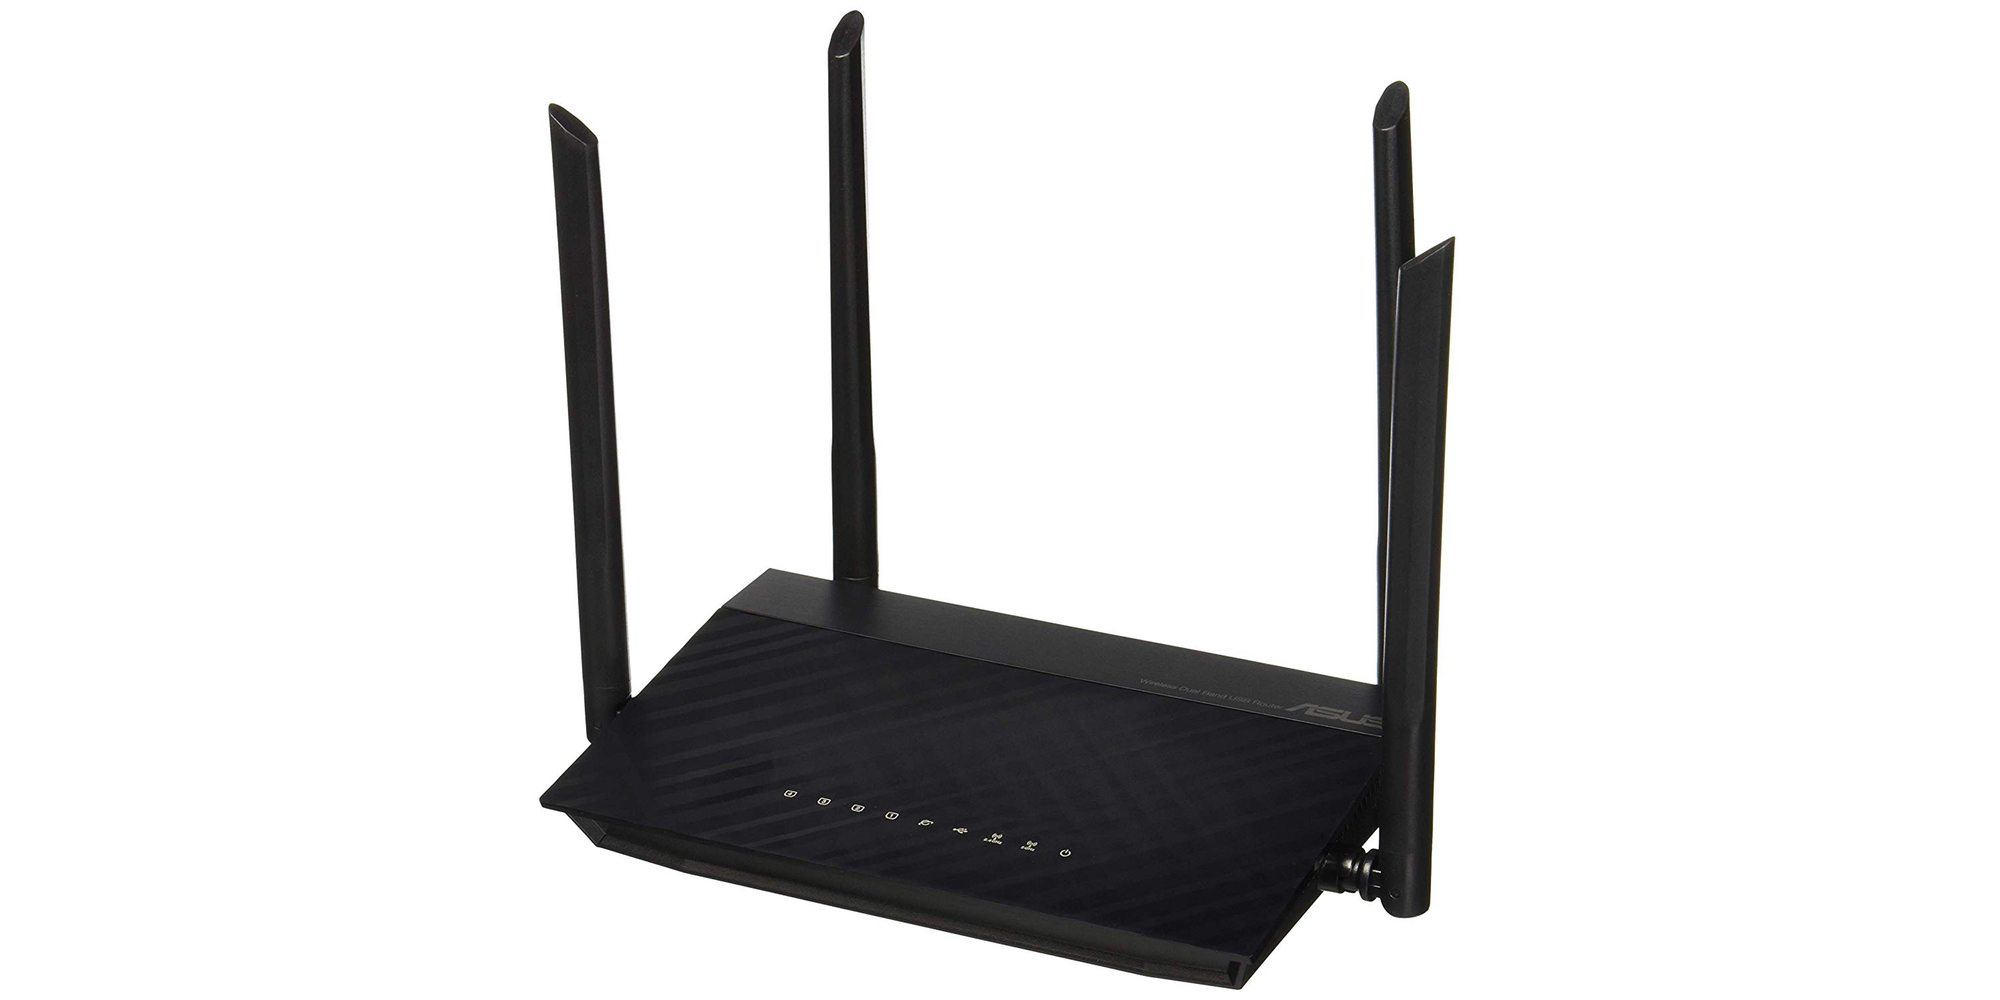 what is the mac utility for asus router